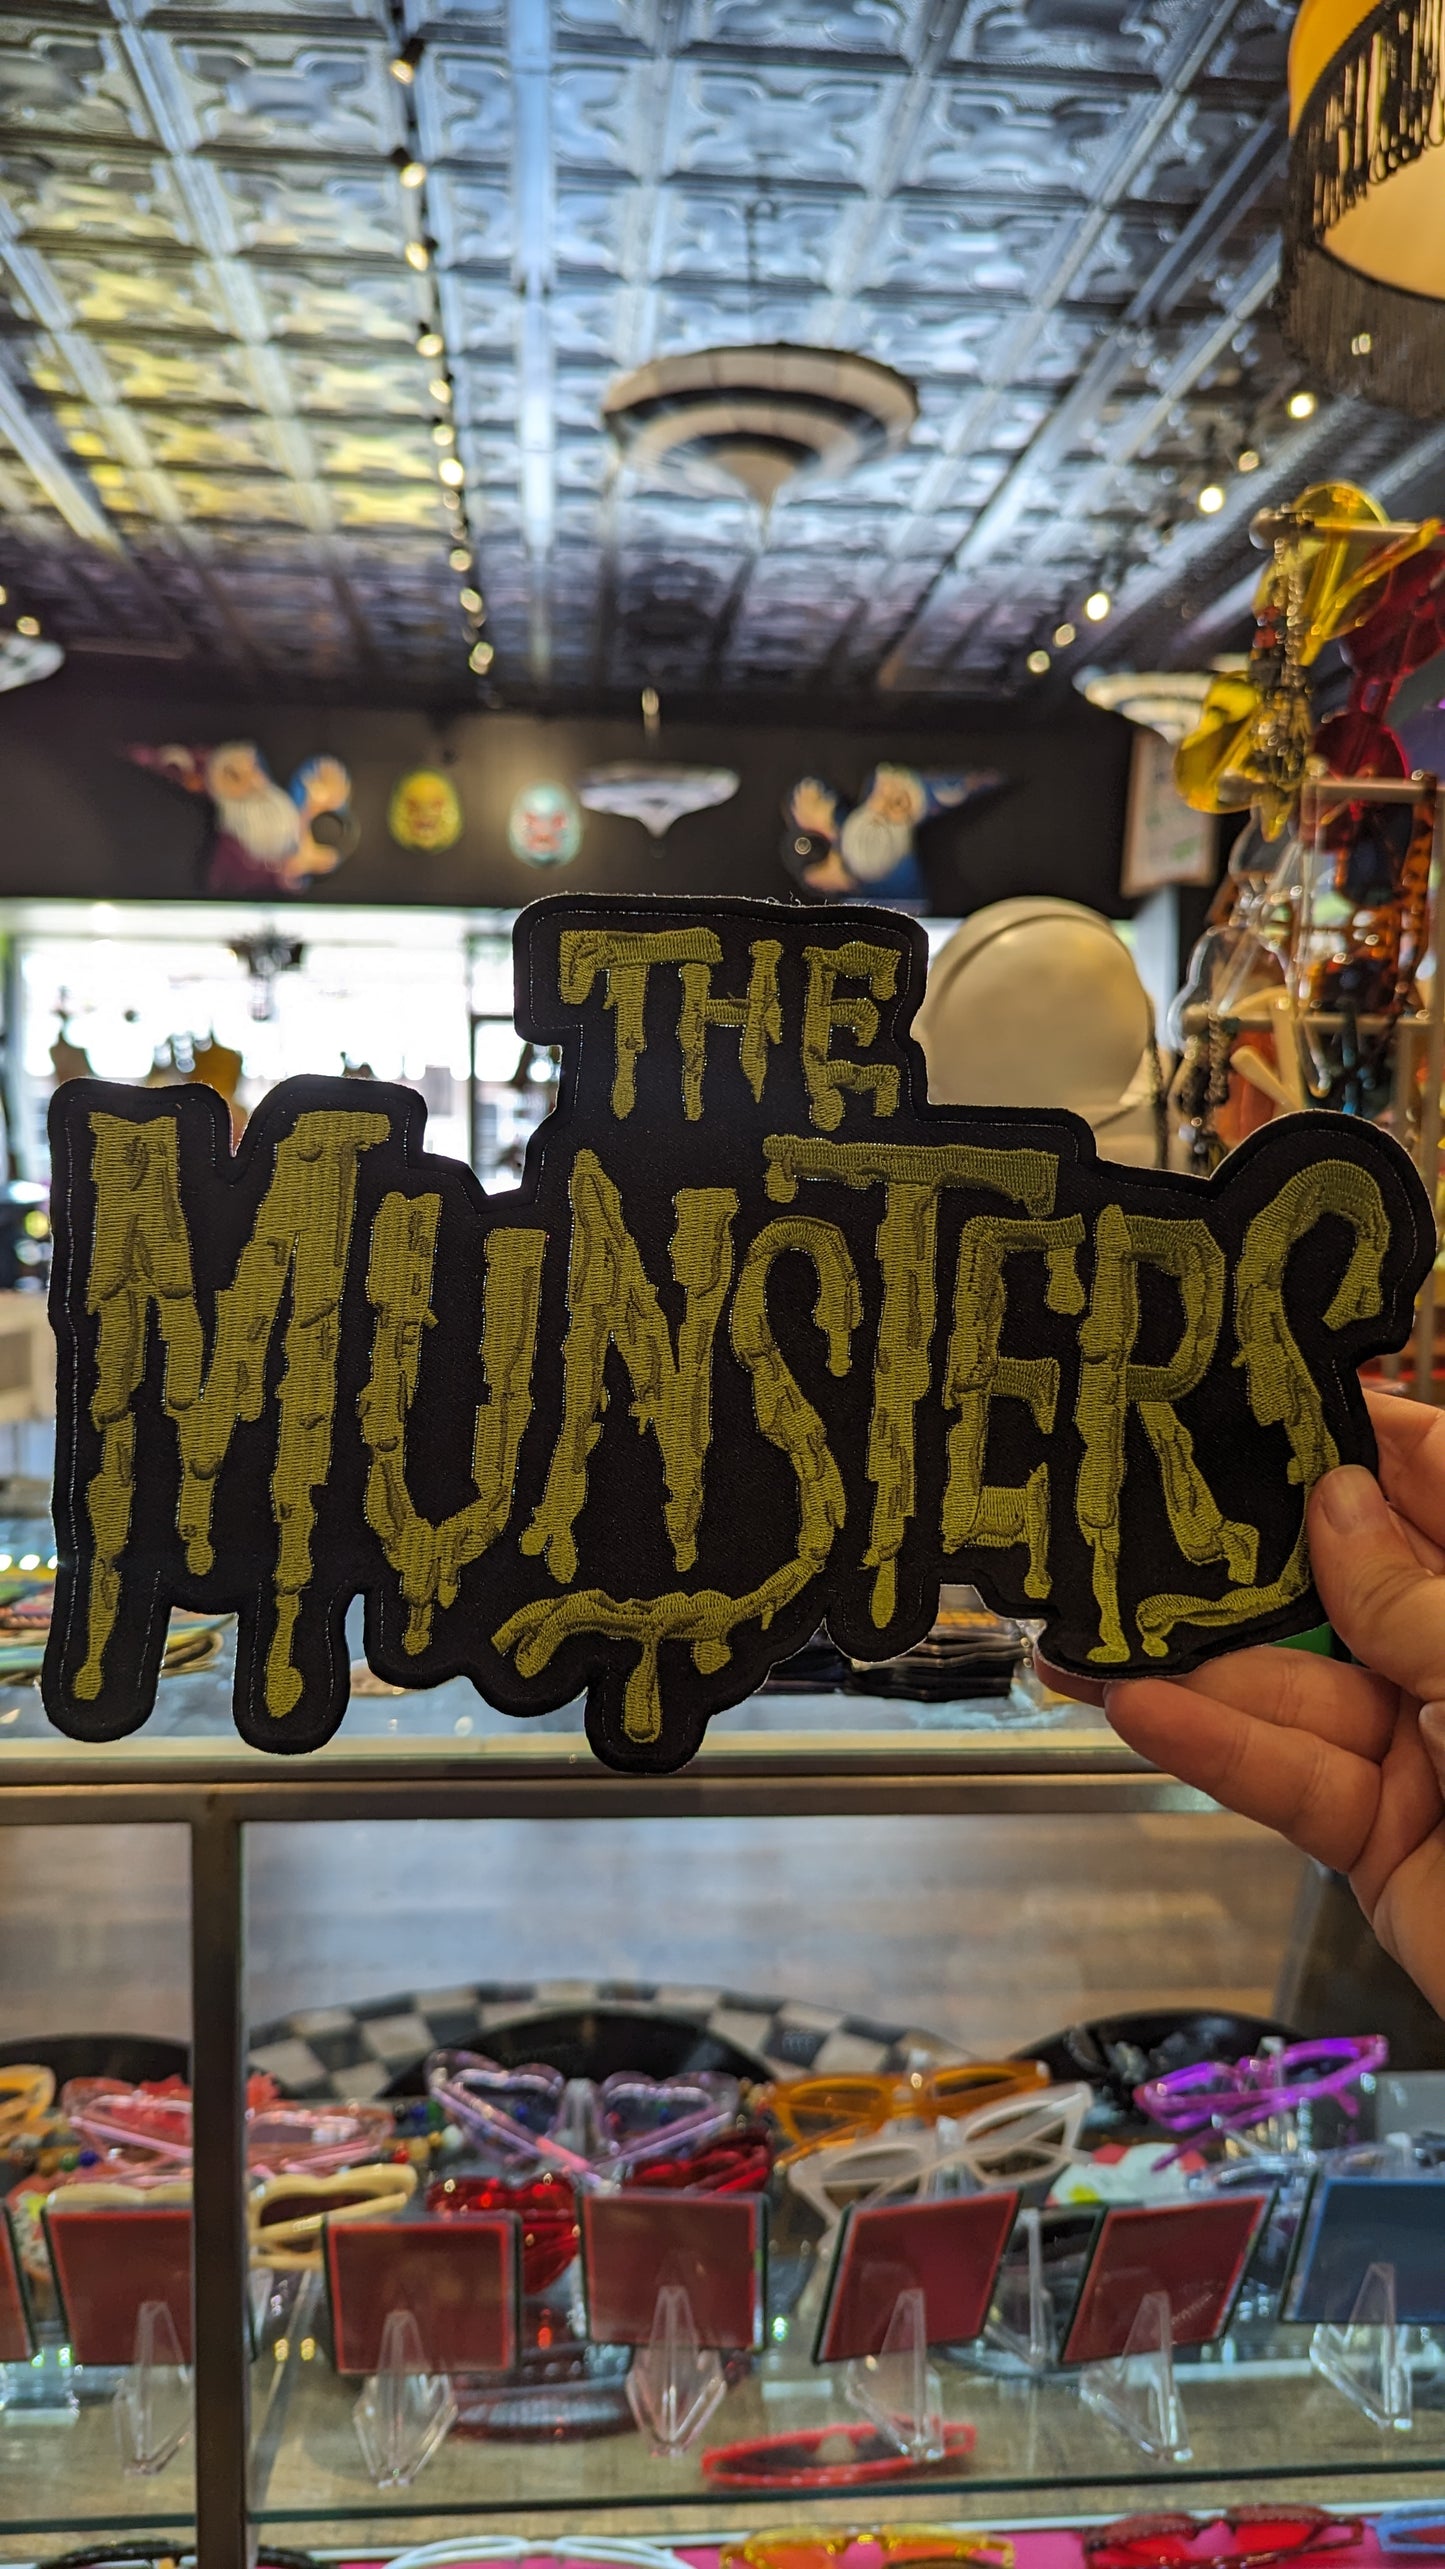 The Munsters logo Large Iron on green and black Patch